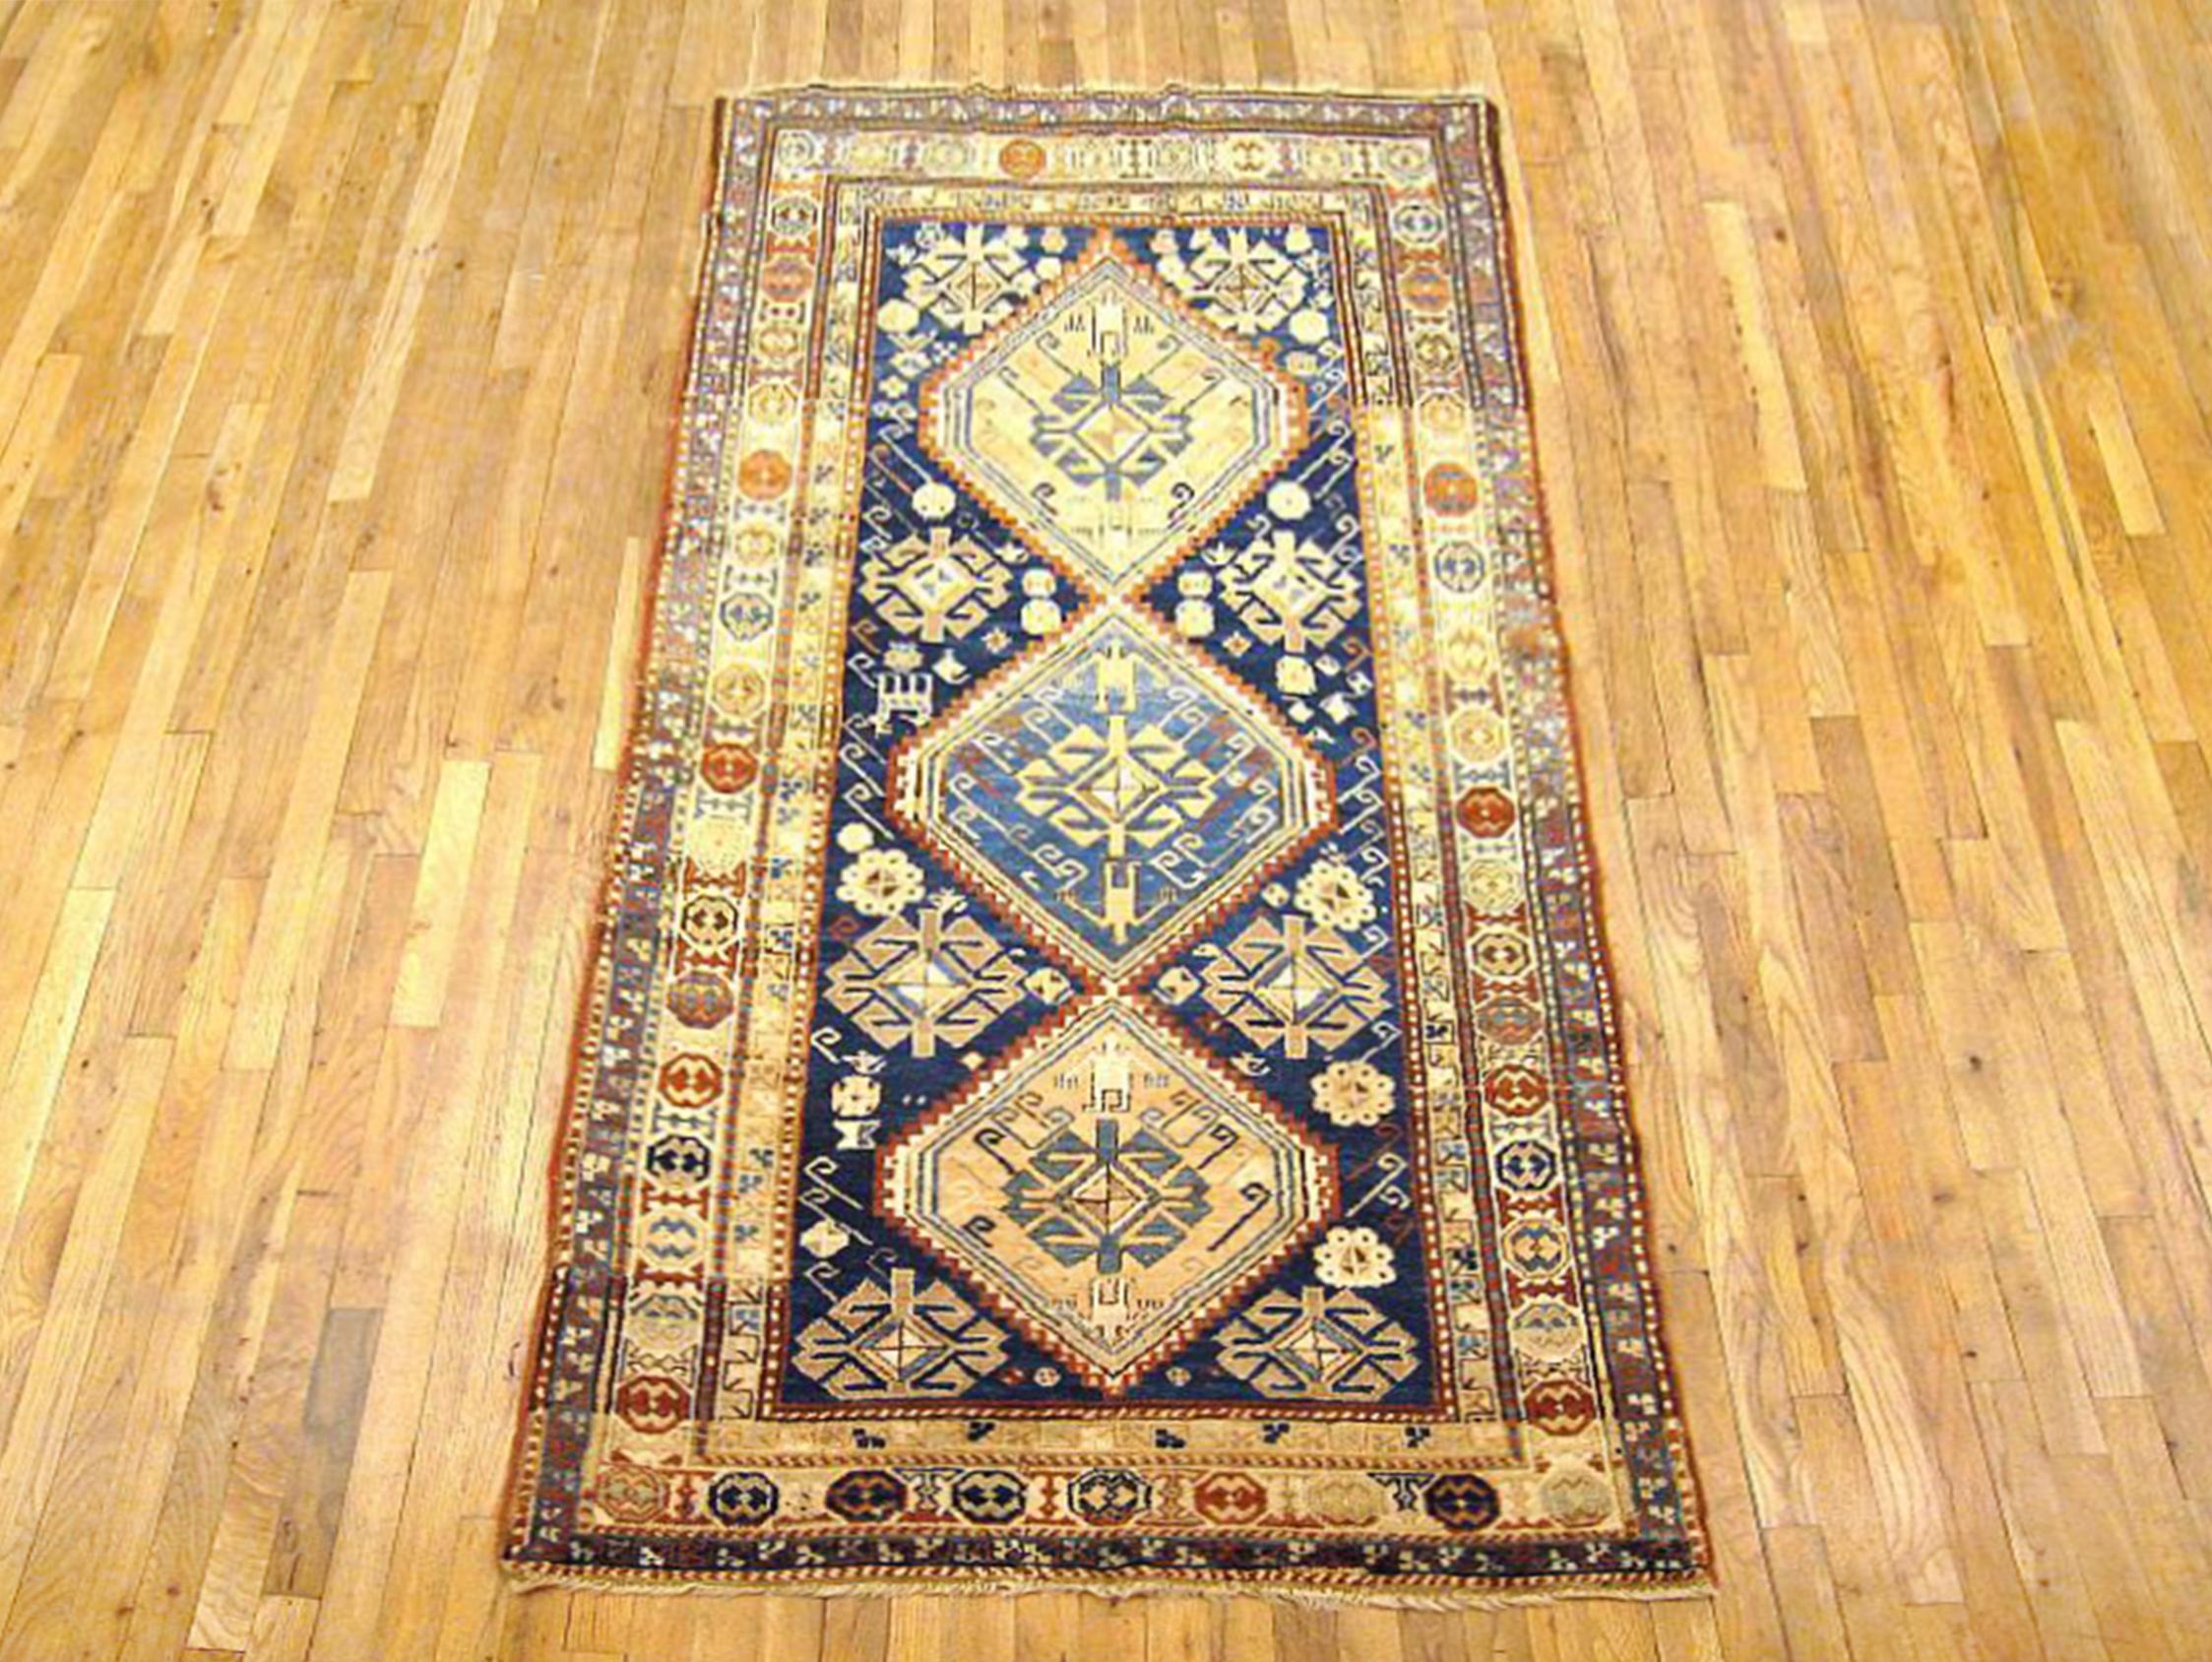 Antique Caucasian Kazak Oriental carpet in Gallery size, circa 1910

A one-of-a-kind antique Caucasian Kazak Oriental Carpet, hand-knotted with soft wool pile. This lovely hand-knotted wool rug features multiple medallions with geometric abstracts